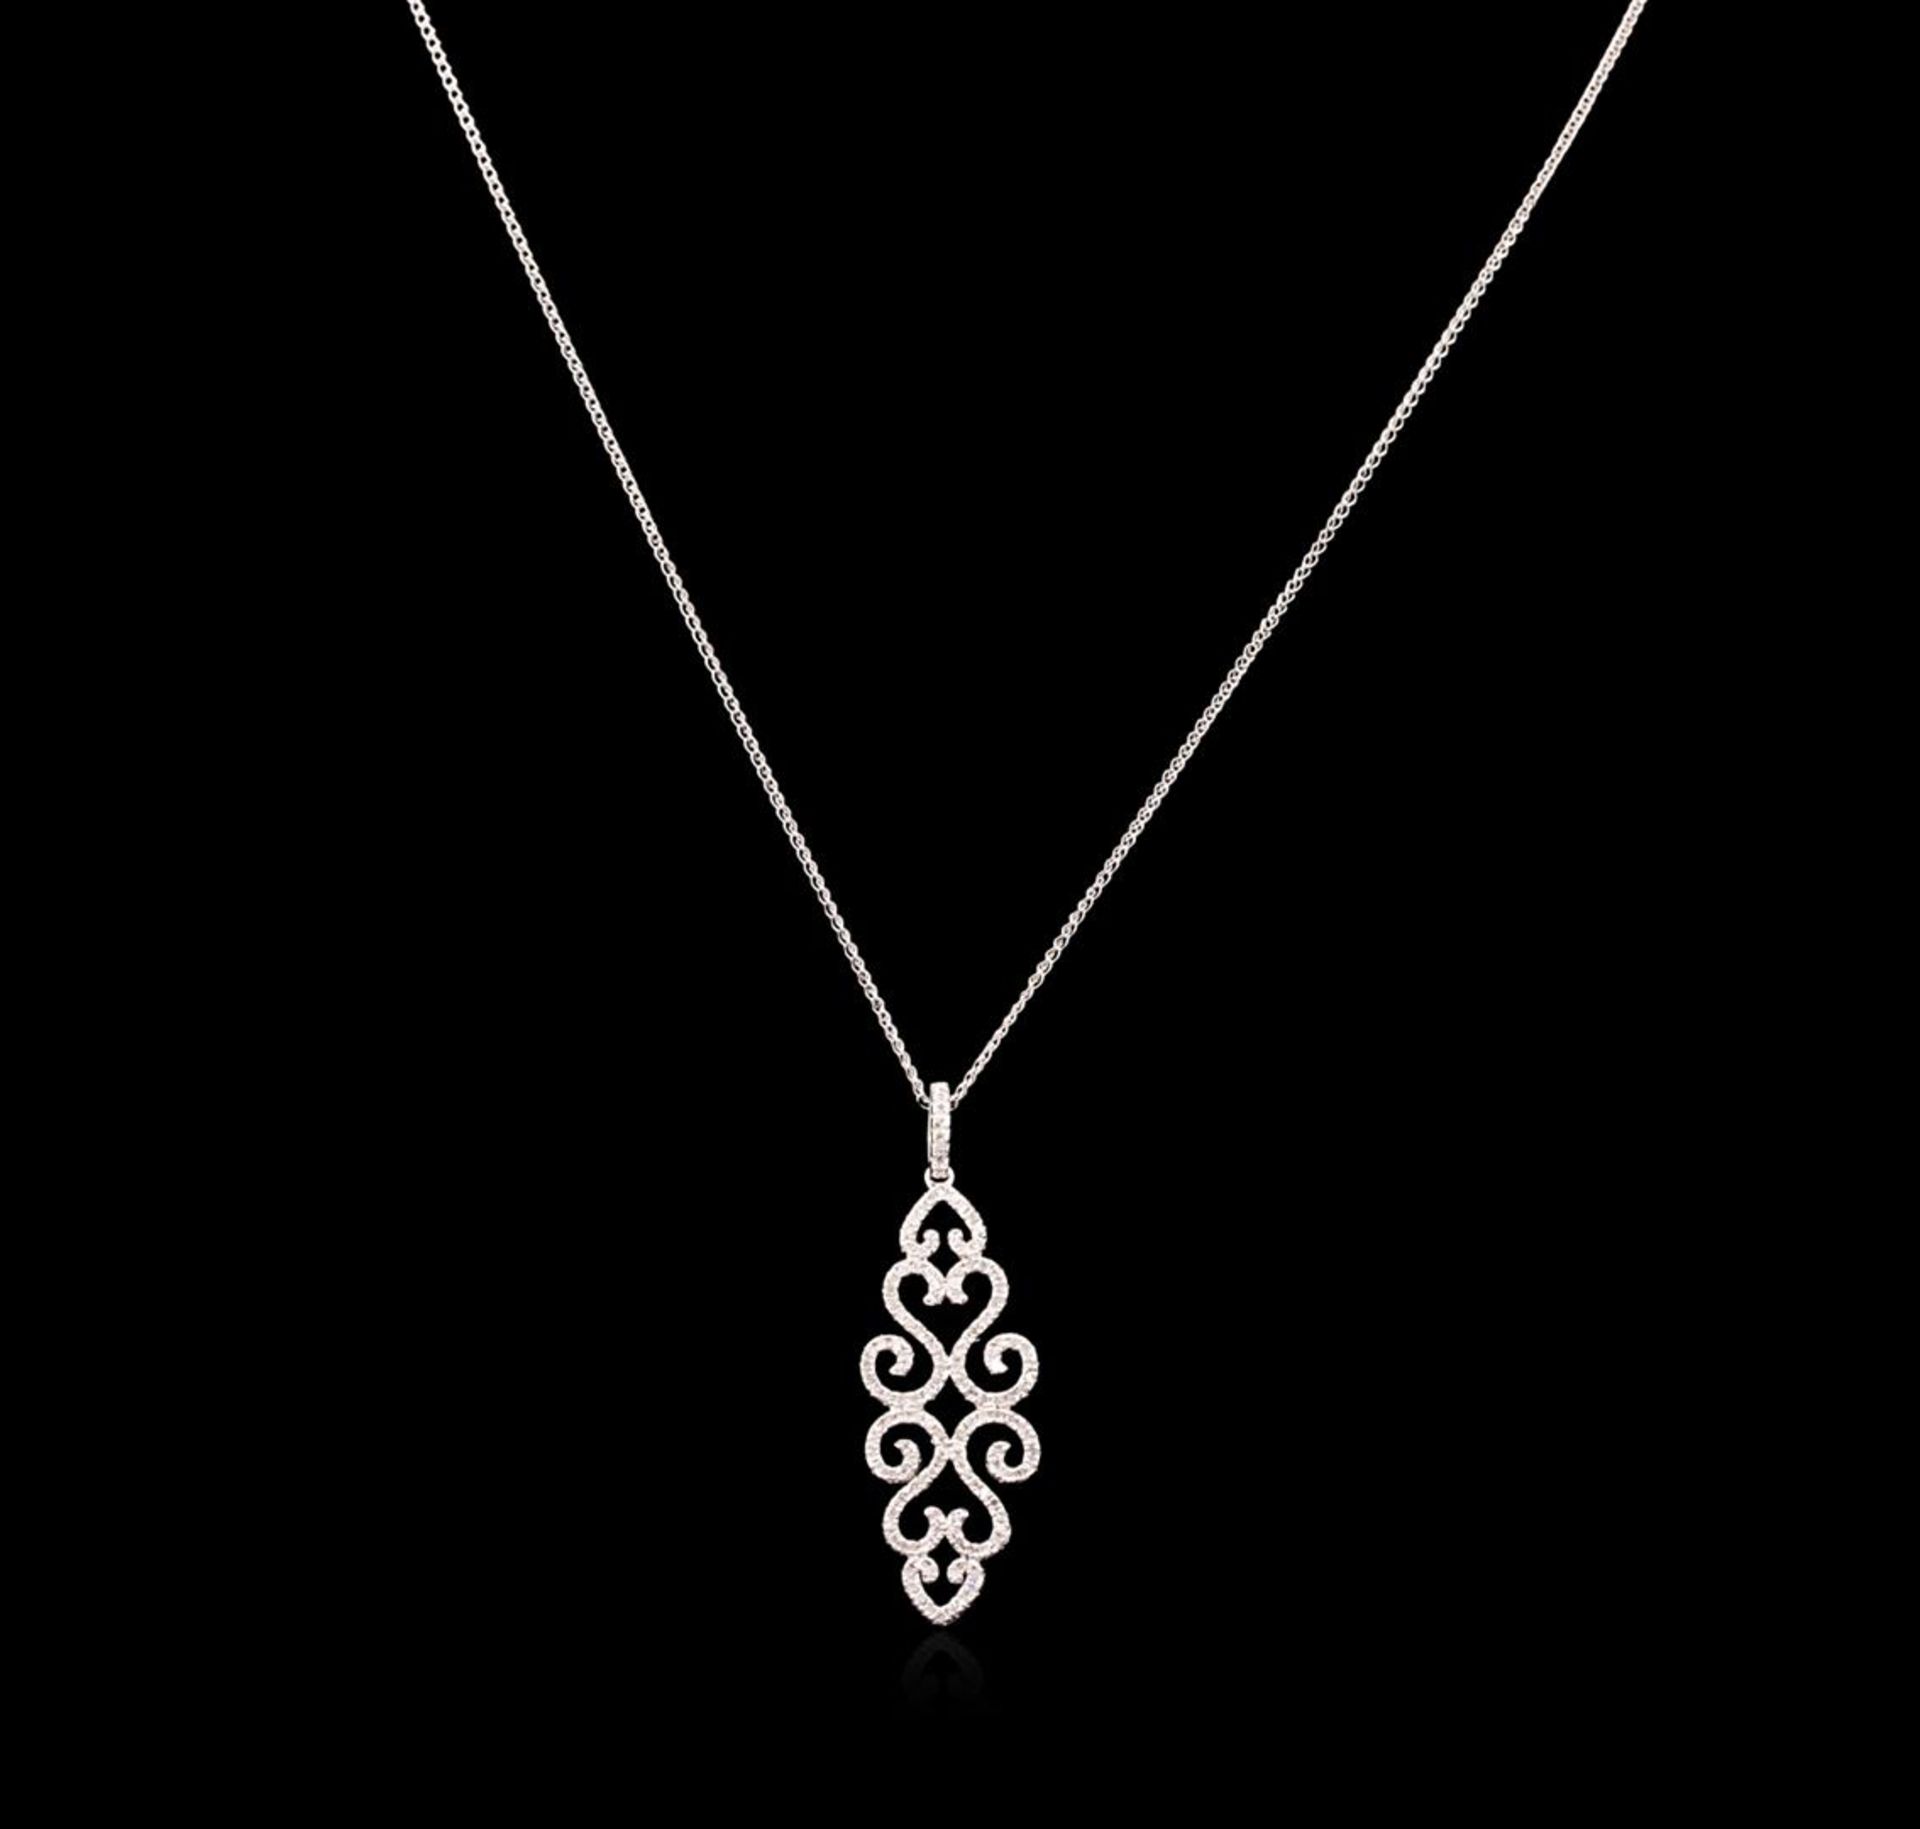 0.66 ctw Diamond Pendant With Chain - 14KT White Gold - Image 2 of 2